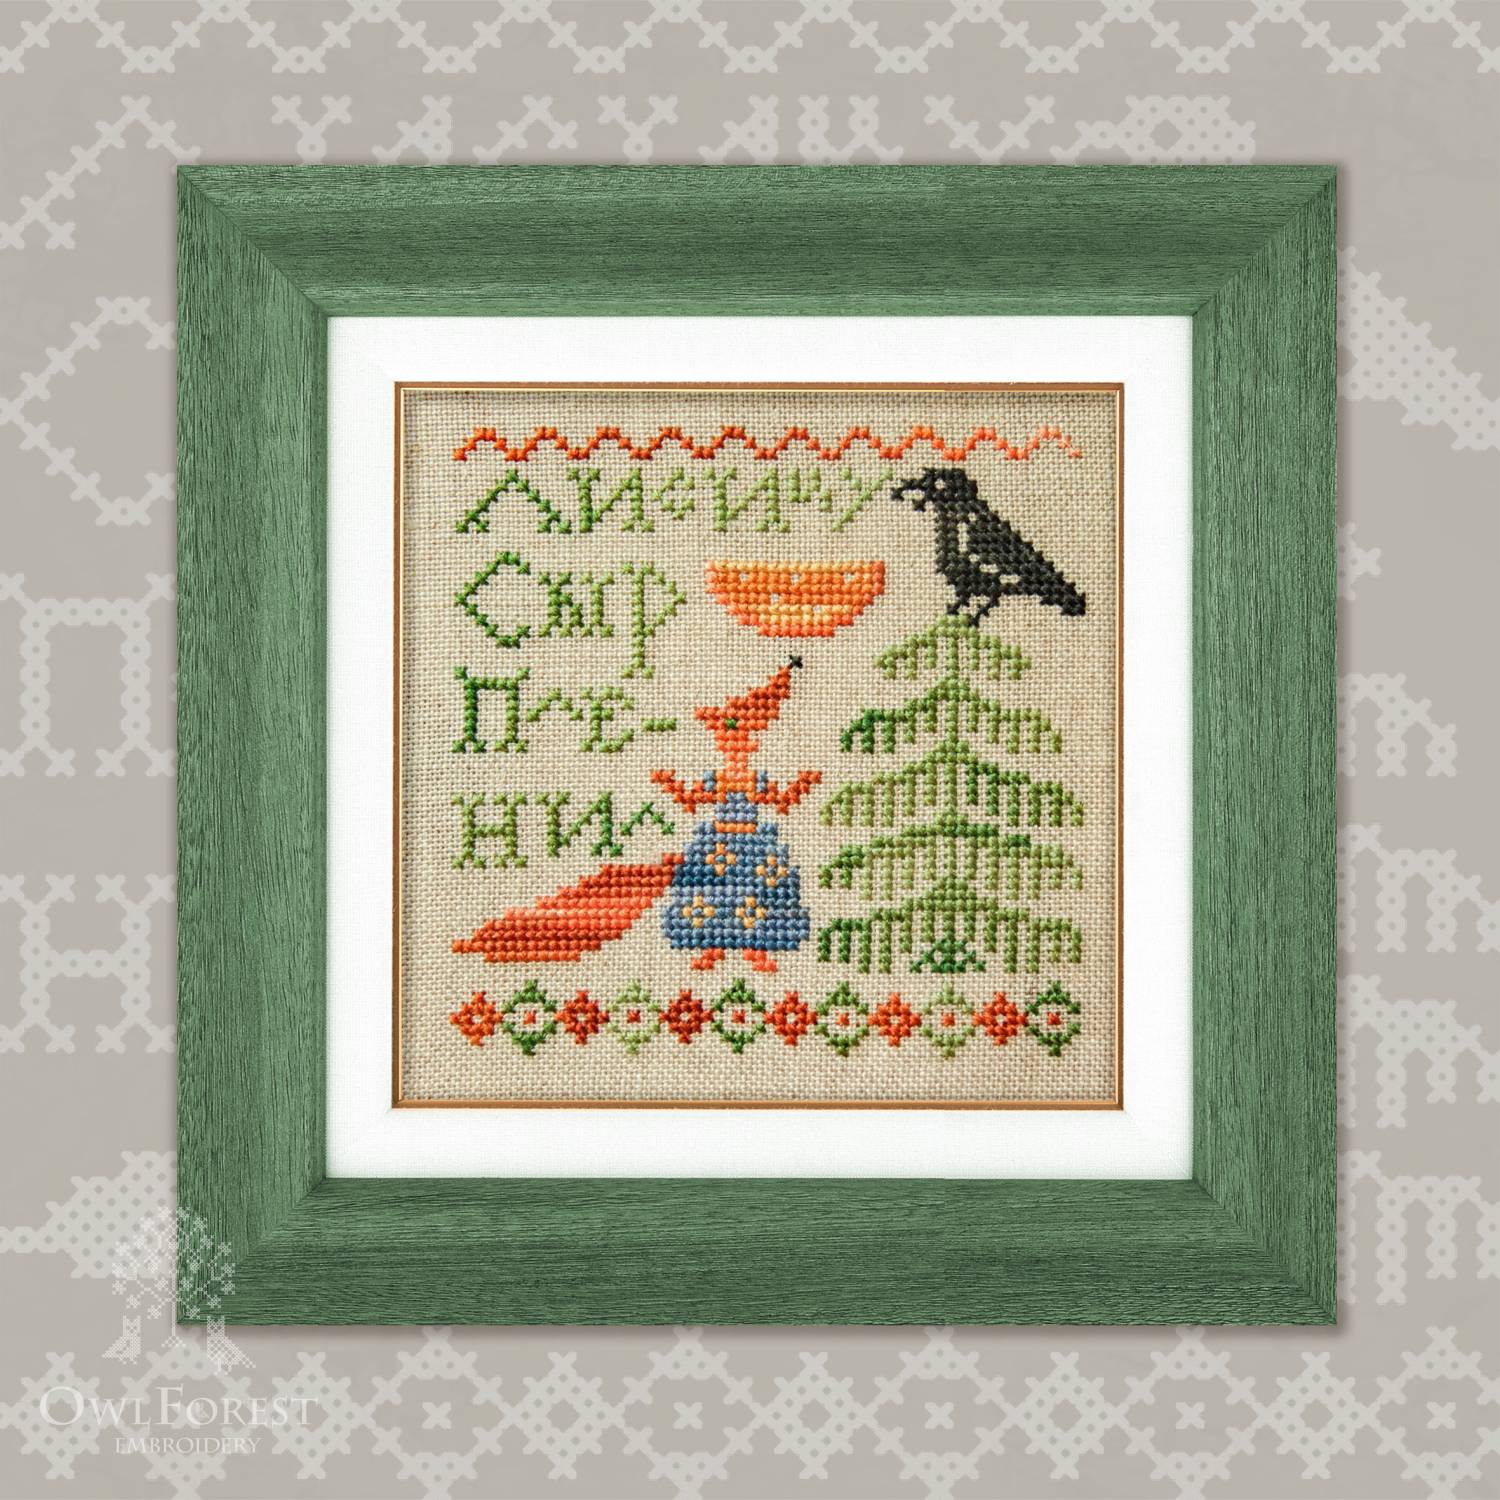 Mini-Embroidery Kit “Fables. Crow and Fox” – Owlforest Embroidery